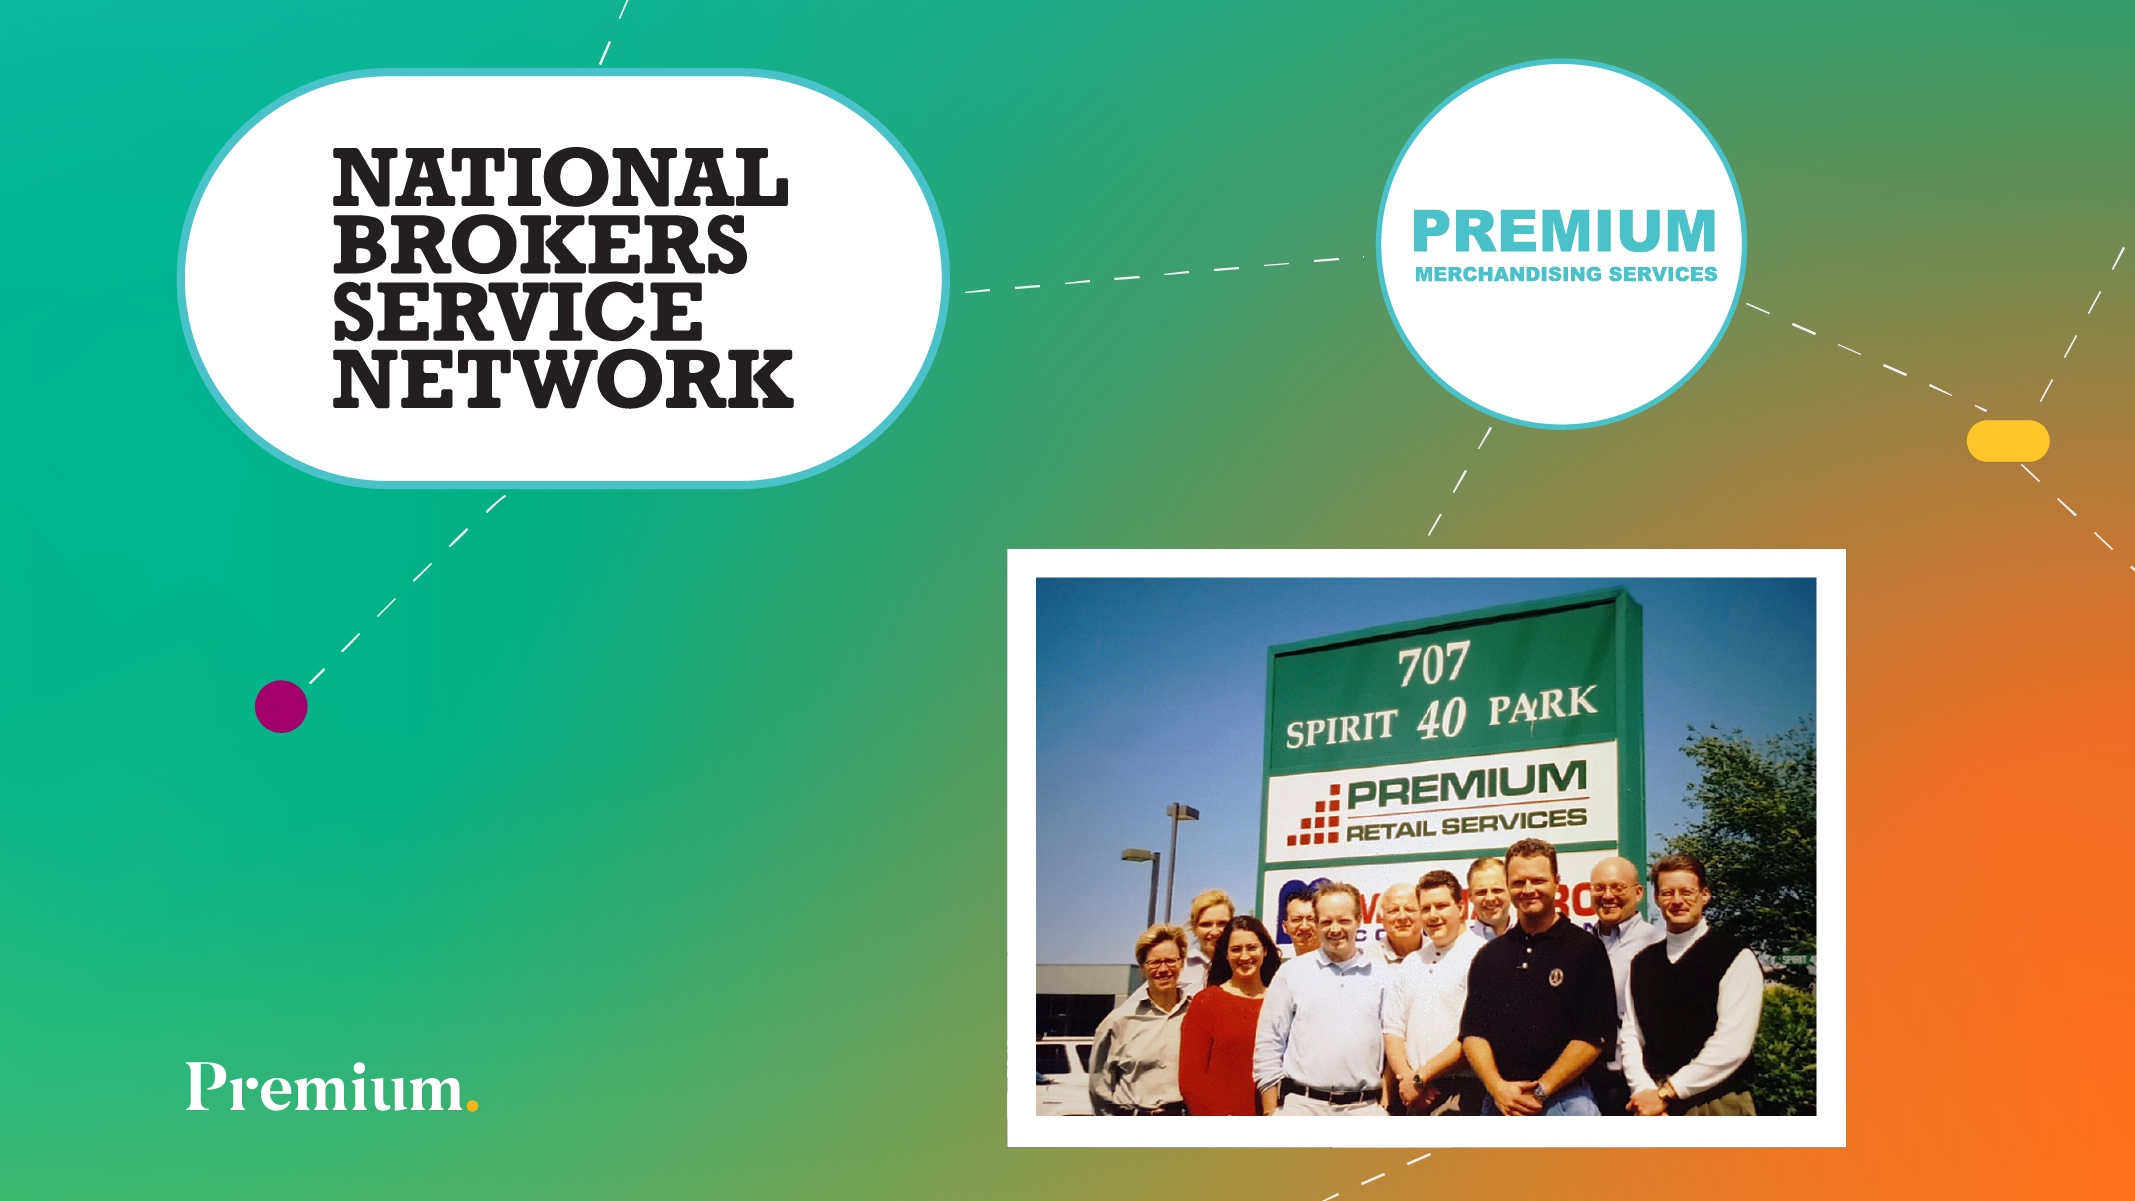 National Brokers Service Network